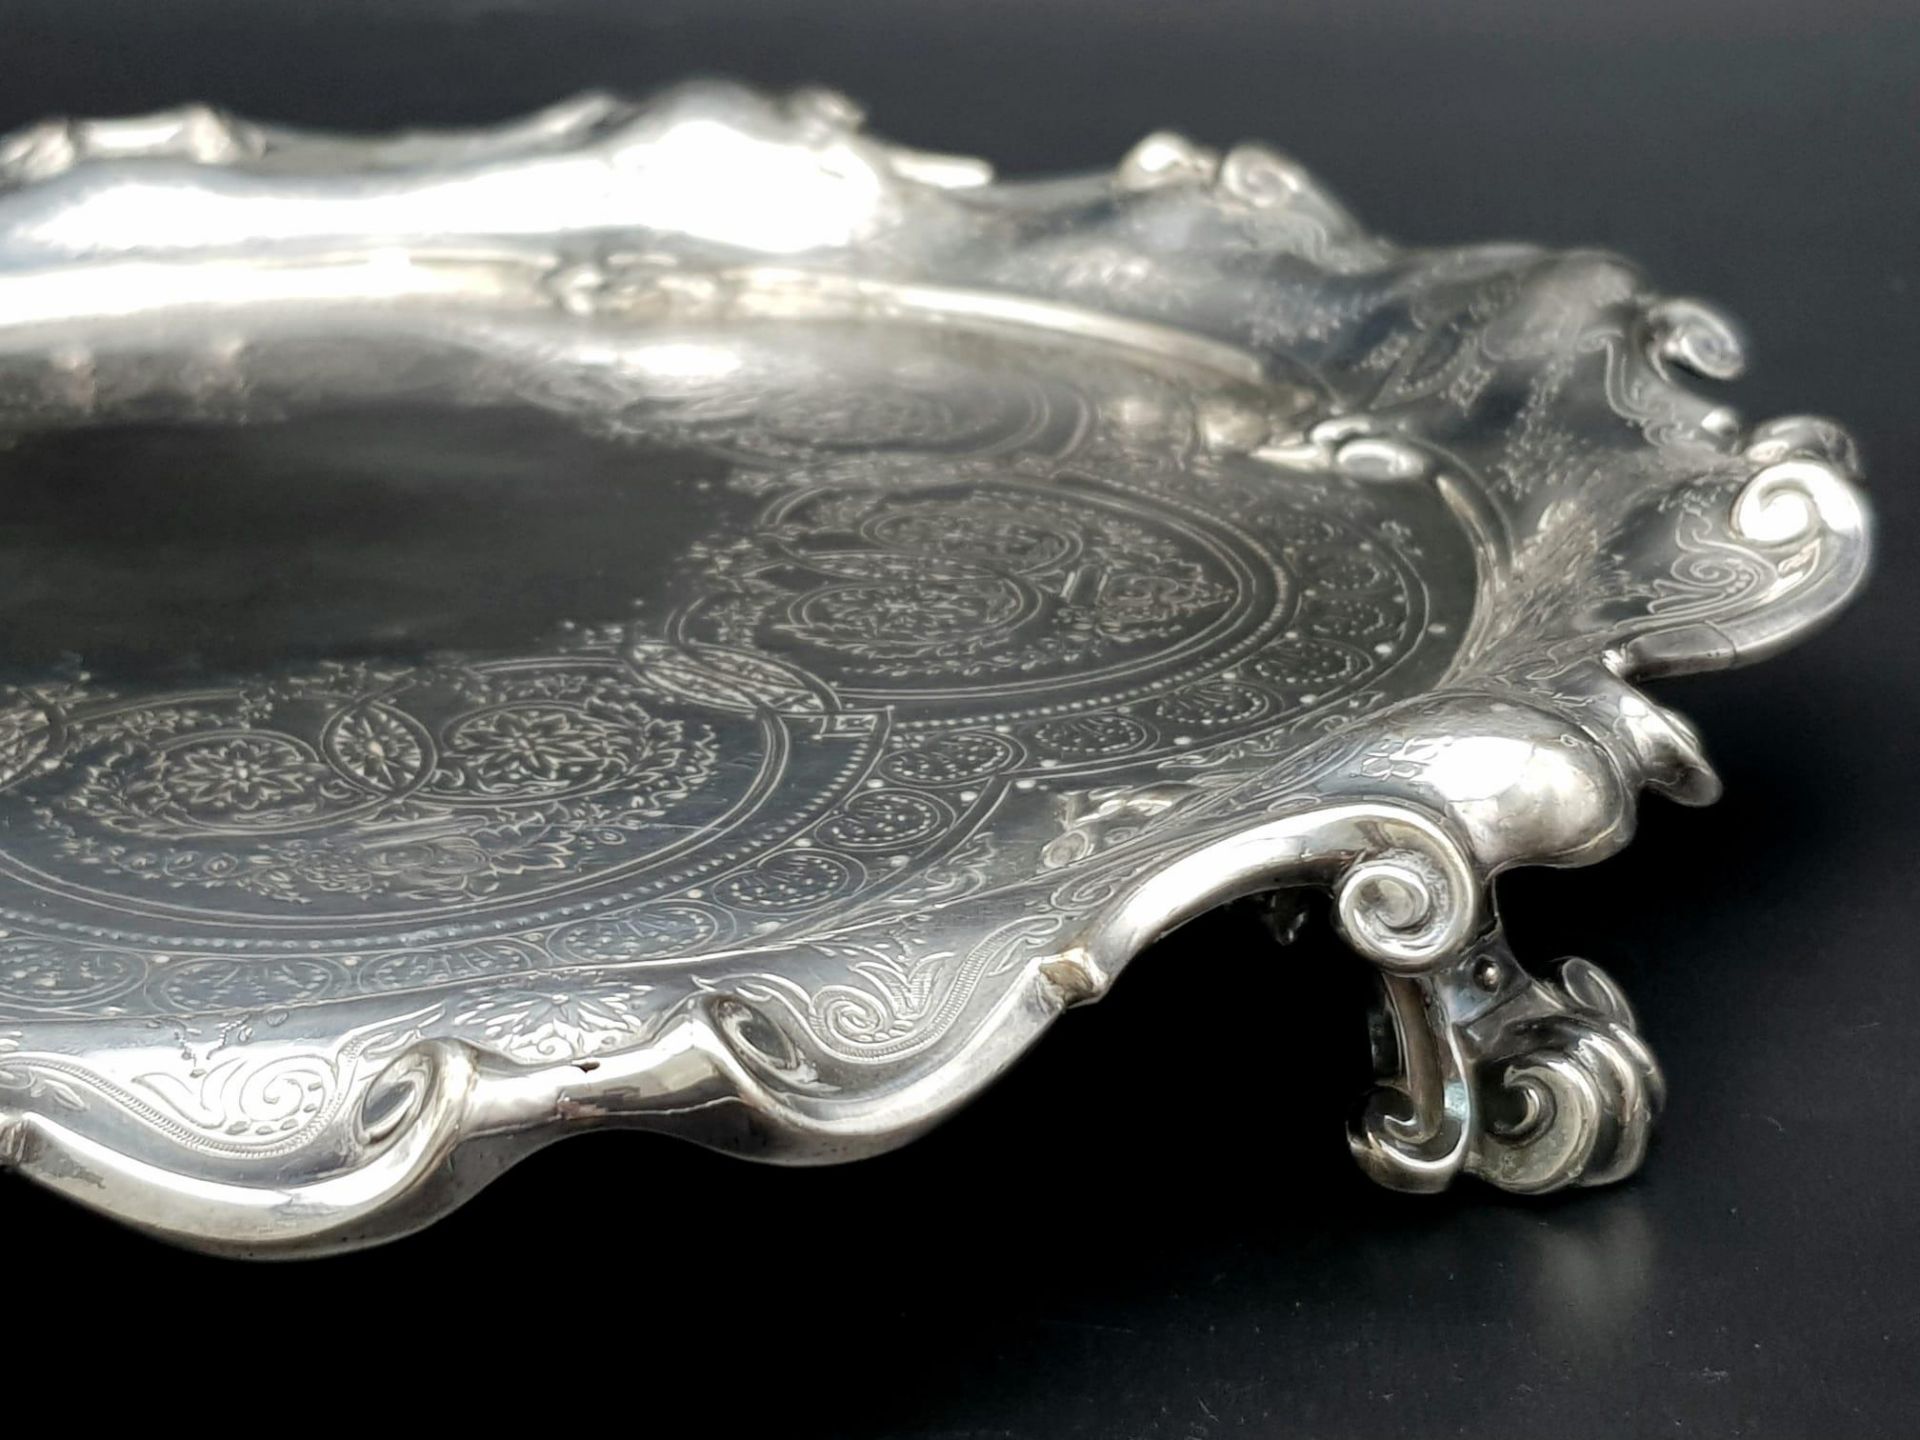 A 761gms solid silver Salva with scrolled edges and hand chased intricate decoration and - Image 4 of 7